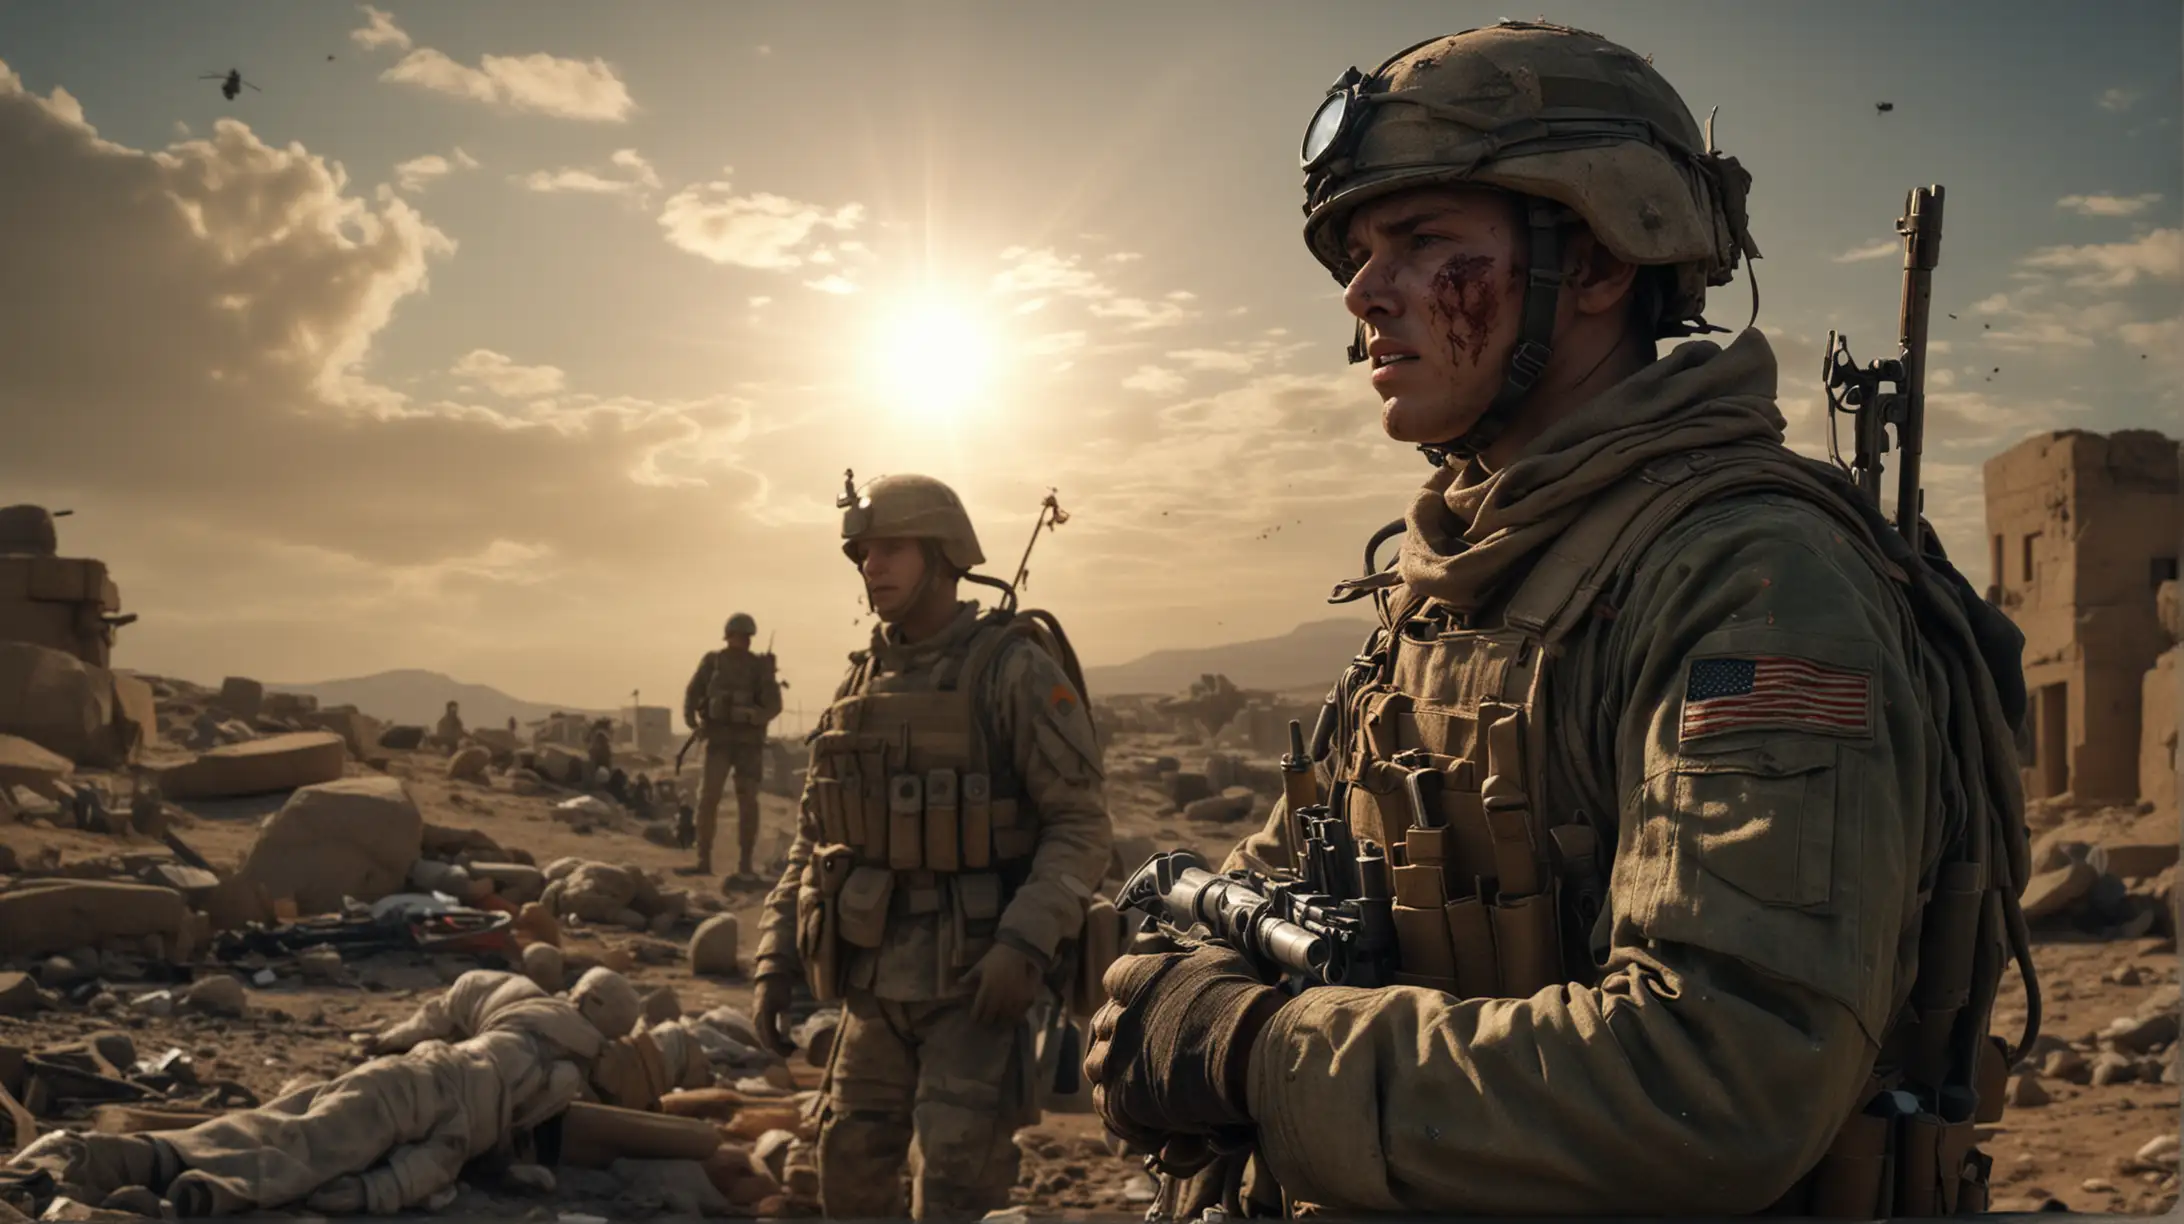 Generate a 4K hyperrealistic image depicting a soldier looking up at 2 suns in the sky while aiming on gun at the stay. Ensure the 3D rendering is highly detailed, showcasing the soldier's agonized expression and bloodied uniform . Utilize HDR lighting to enhance the dramatic atmosphere, with photorealistic textures conveying the severity of the soldier's trauma. Incorporate high-resolution elements of the medical setting, including surgical instruments and bandages, to add authenticity to the scene. The image should evoke a sense of empathy and the brutal reality of war.